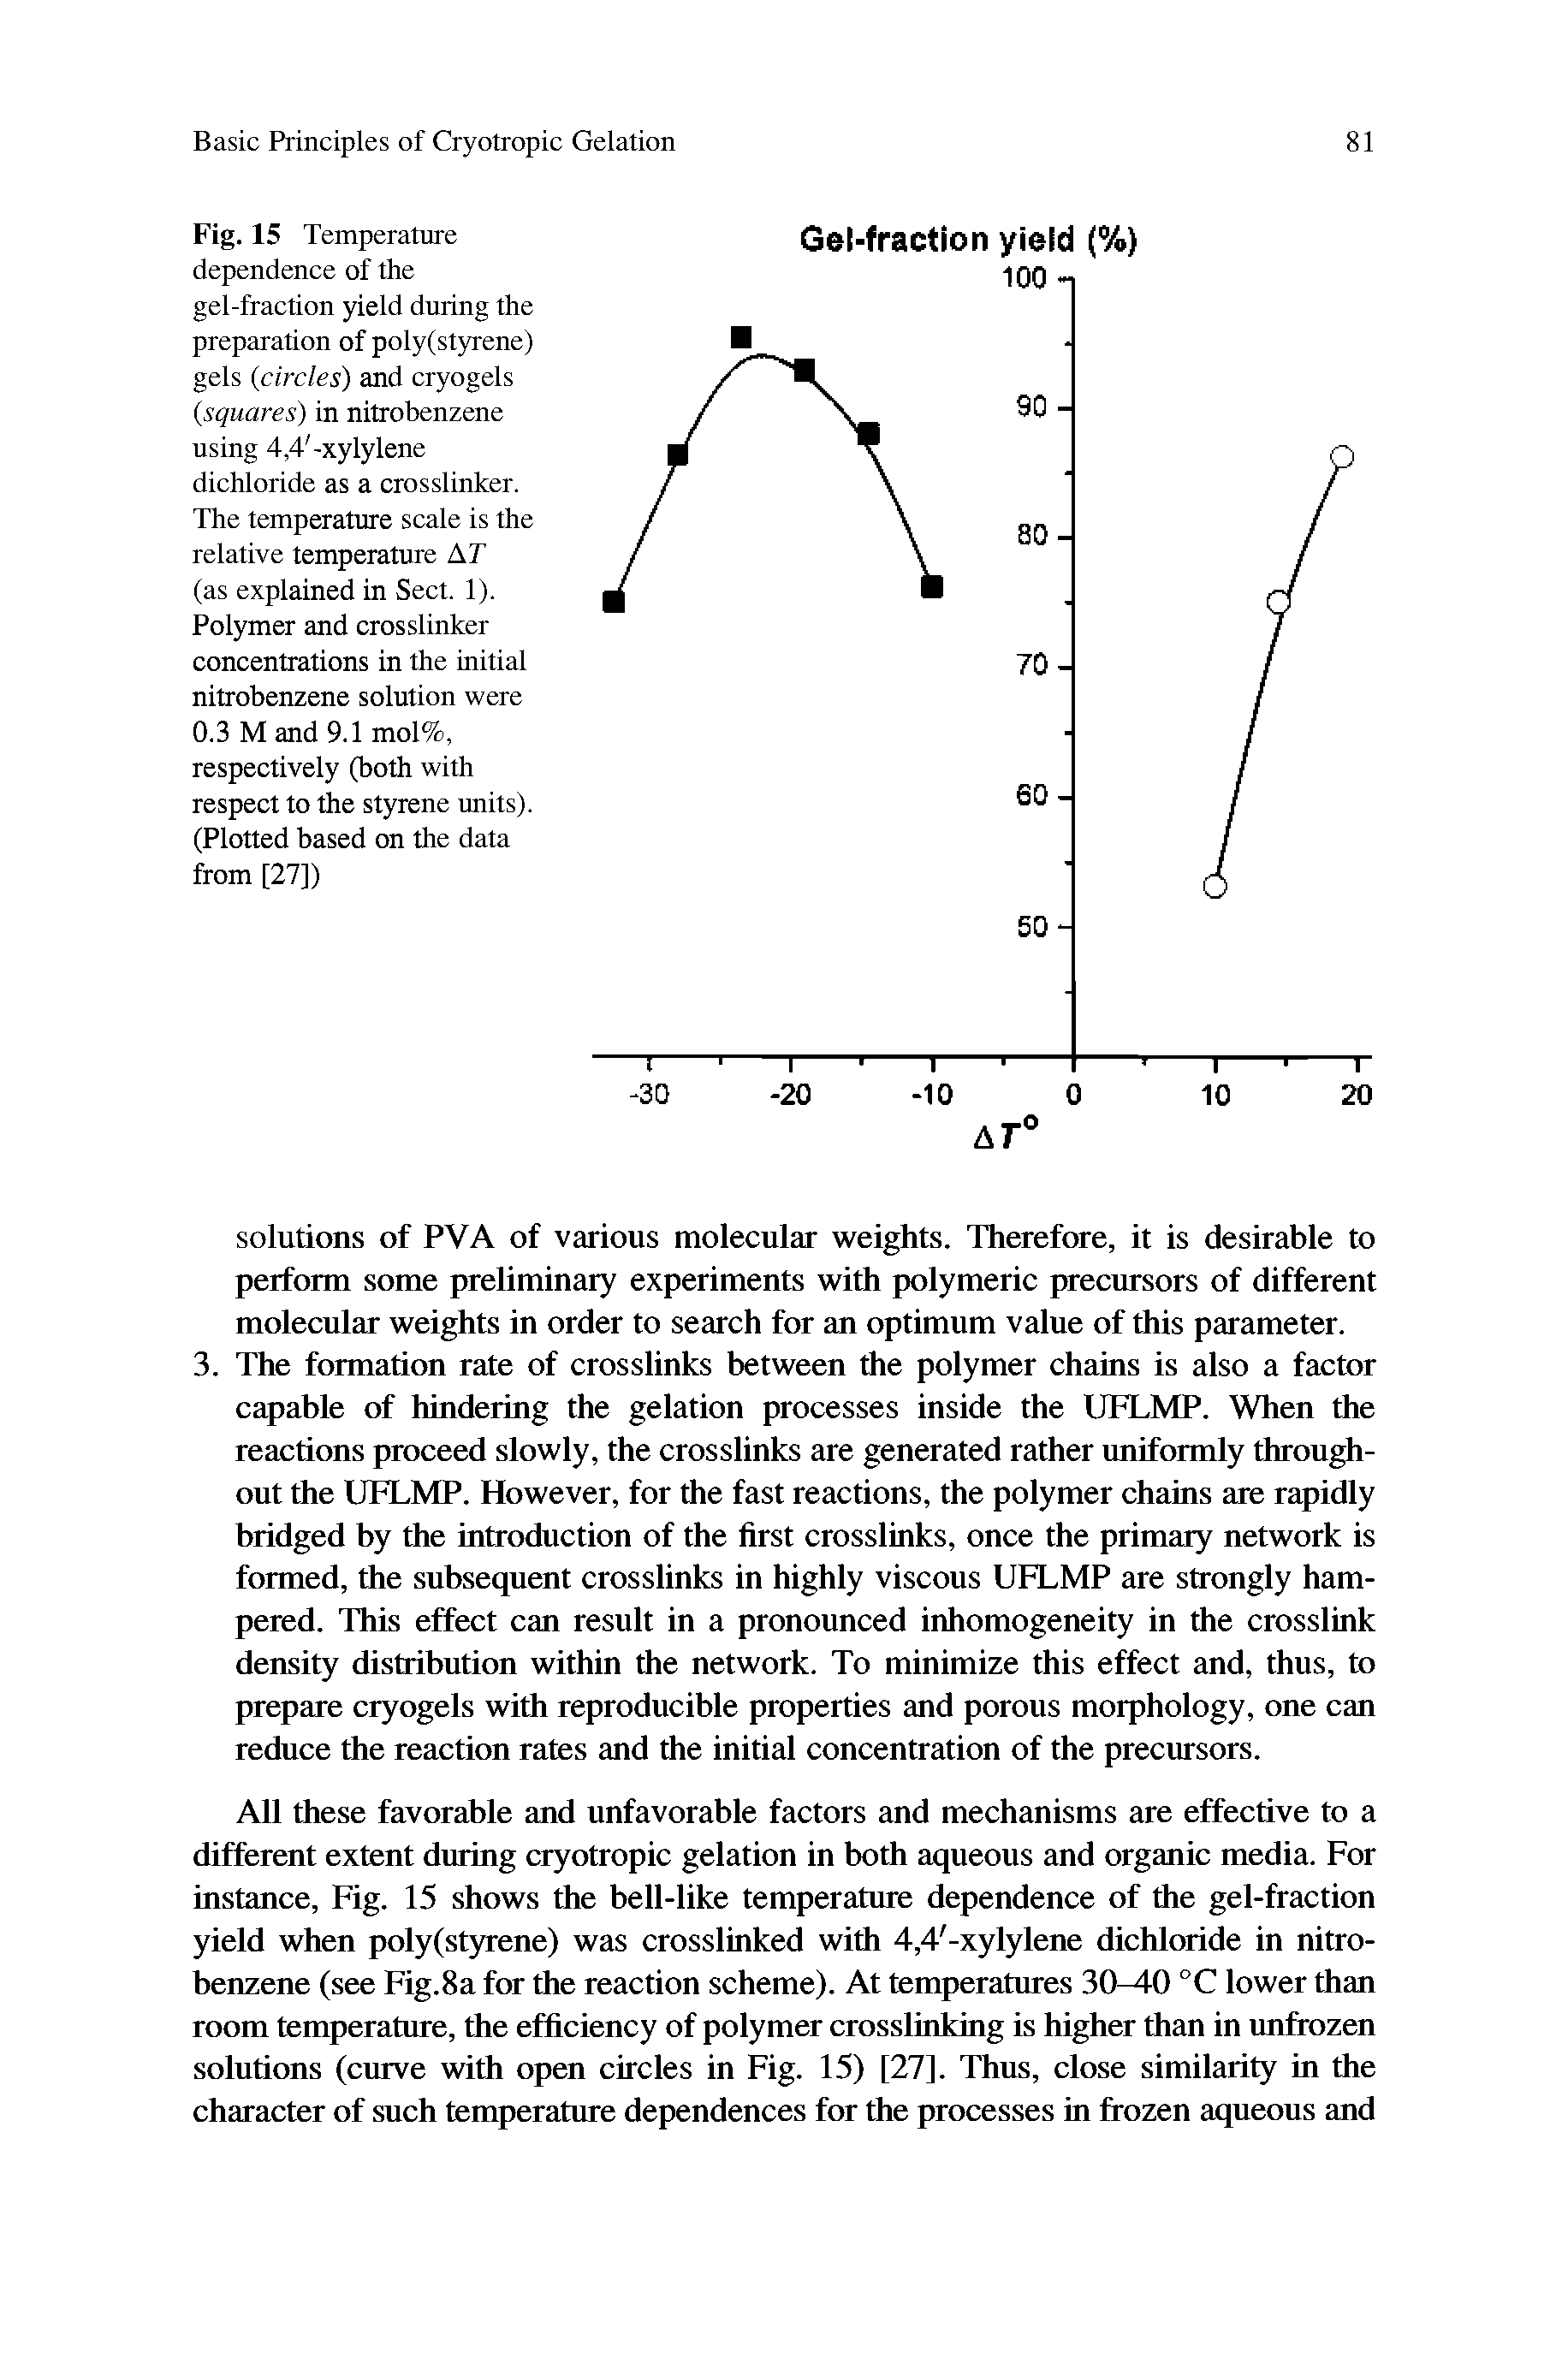 Fig. 15 Temperature dependence of the gel-fraction yield during the preparation of poly(styrene) gels (circles) and cryogels (squares) in nitrobenzene using 4,4 -xylylene dichloride as a crosslinker. The temperature scale is the relative temperature AT (as explained in Sect. 1). Polymer and crosslinker concentrations in the initial nitrobenzene solution were 0.3 M and 9.1 mol%, respectively (both with respect to the styrene units). (Plotted based on the data from [27])...